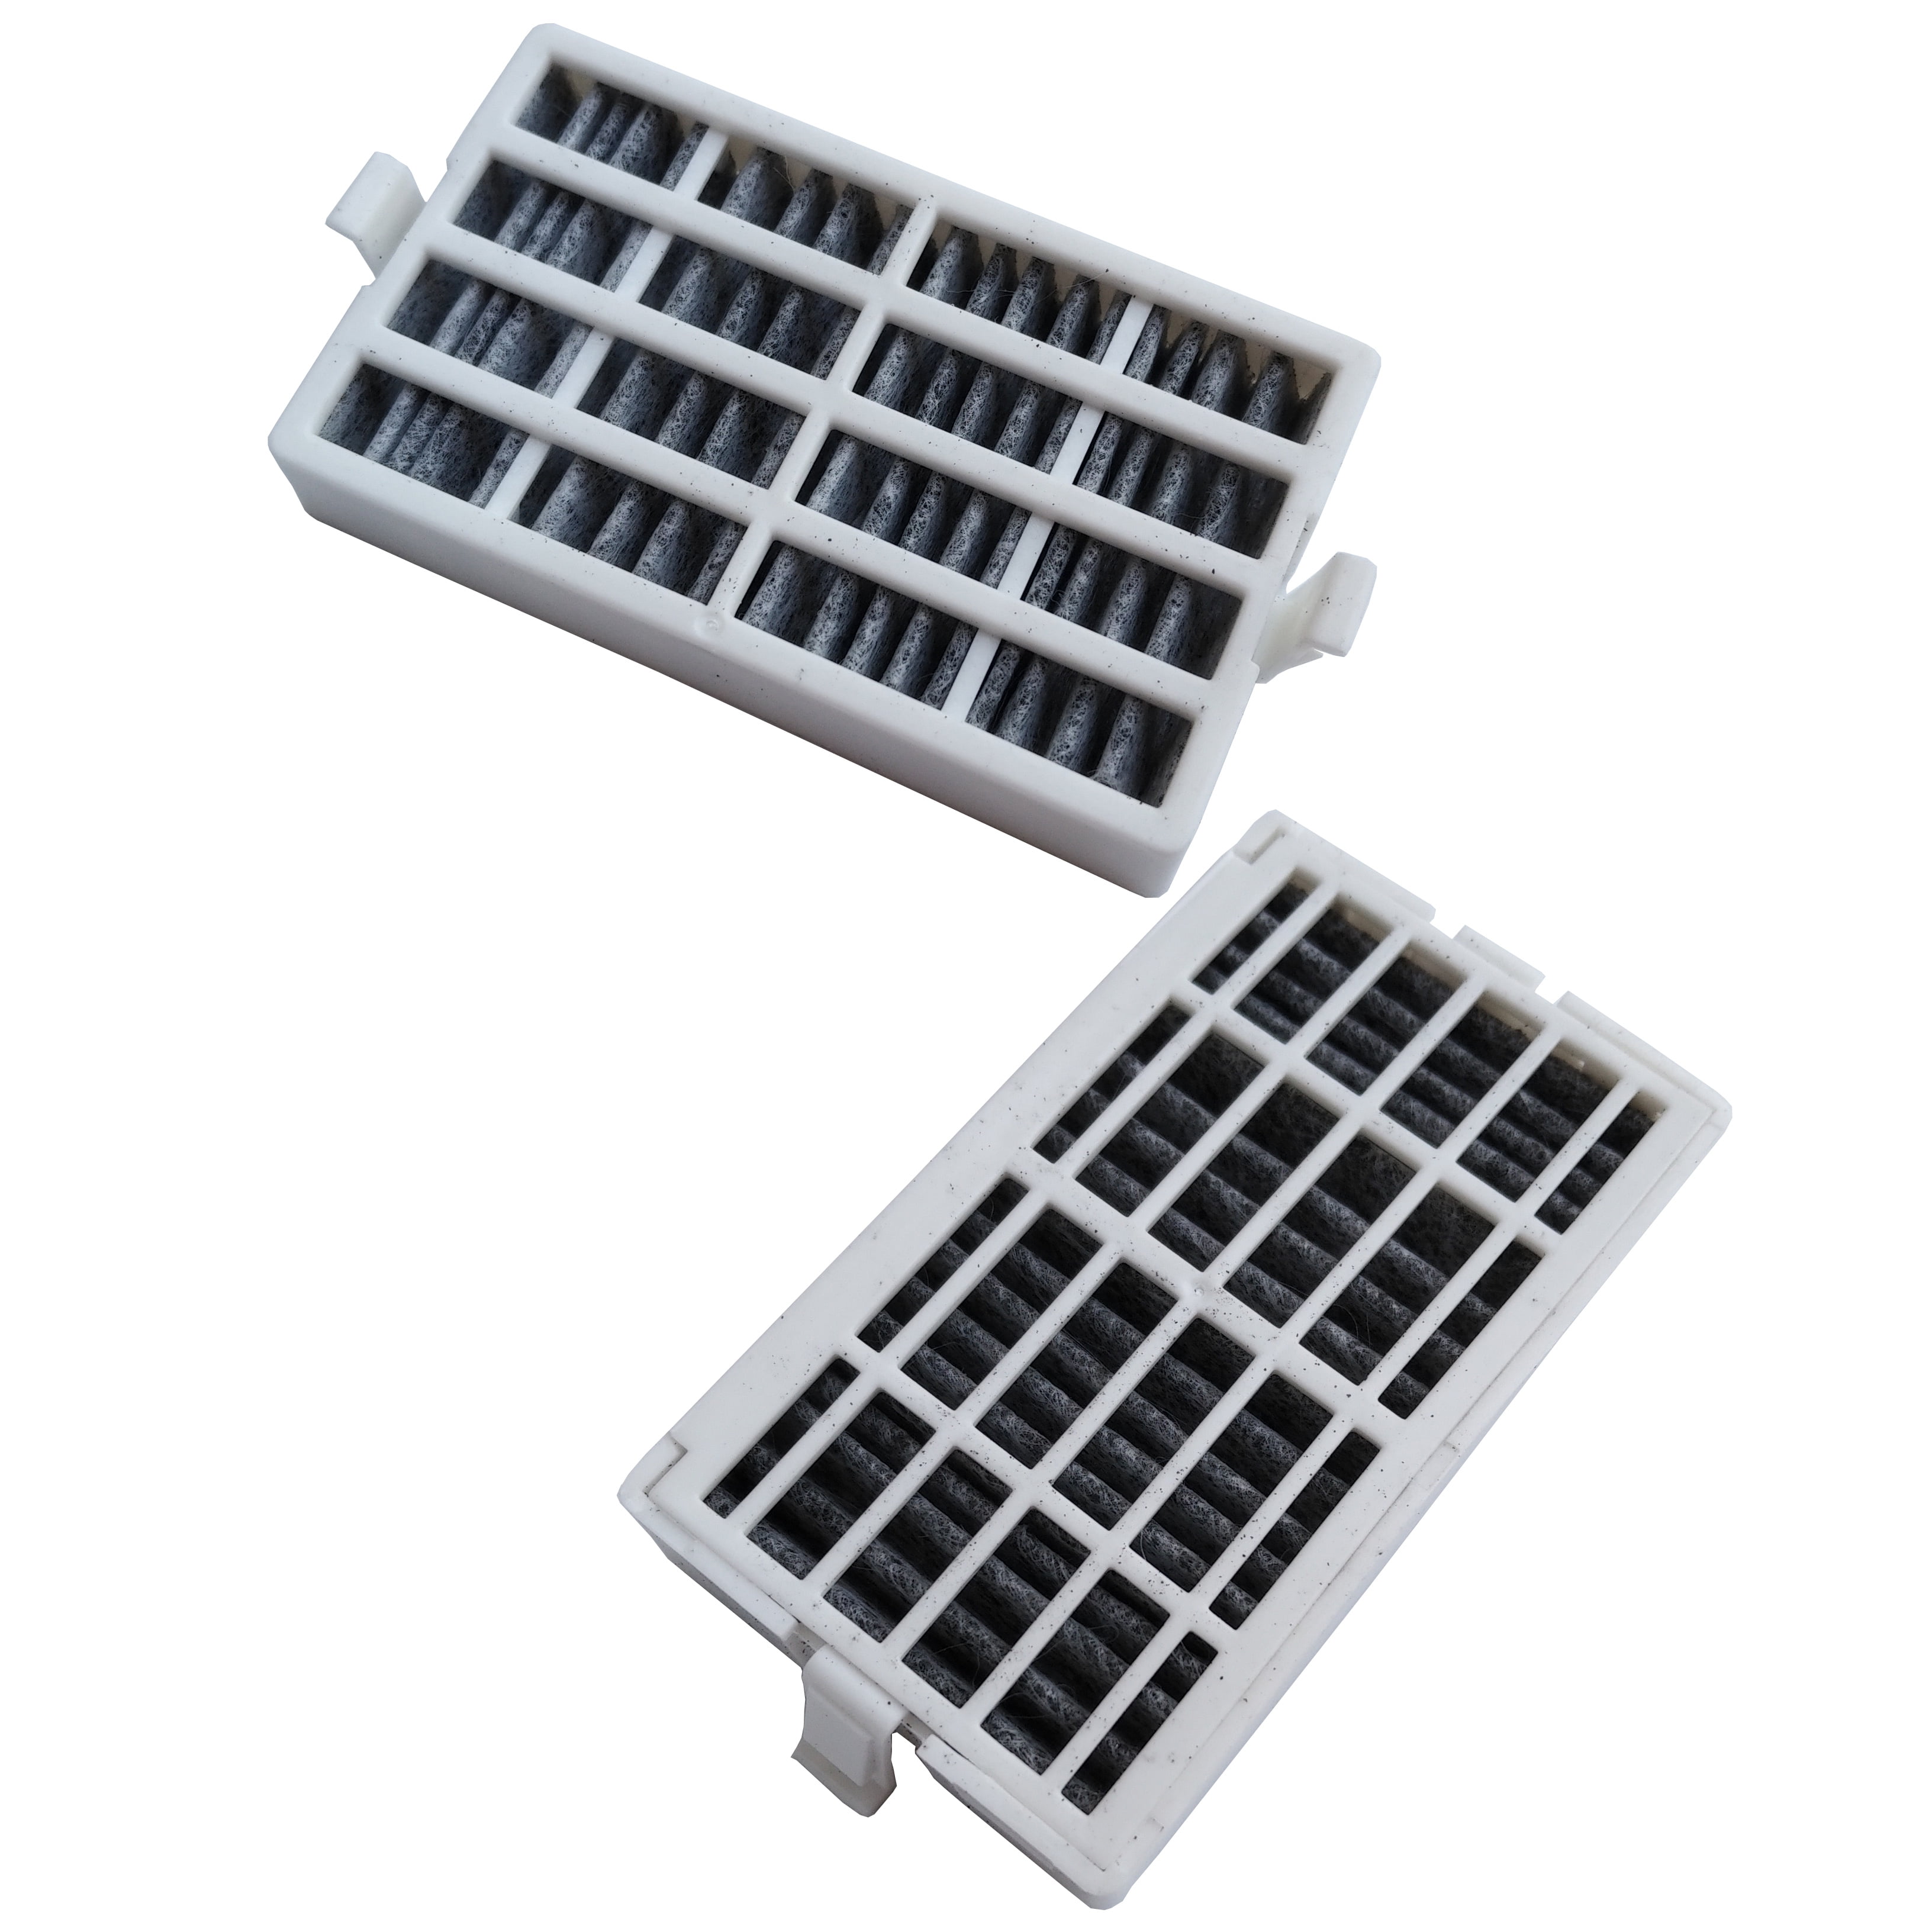 Air Filter for Whirlpool Refrigerator AIR1 W10311524 2-Pack 